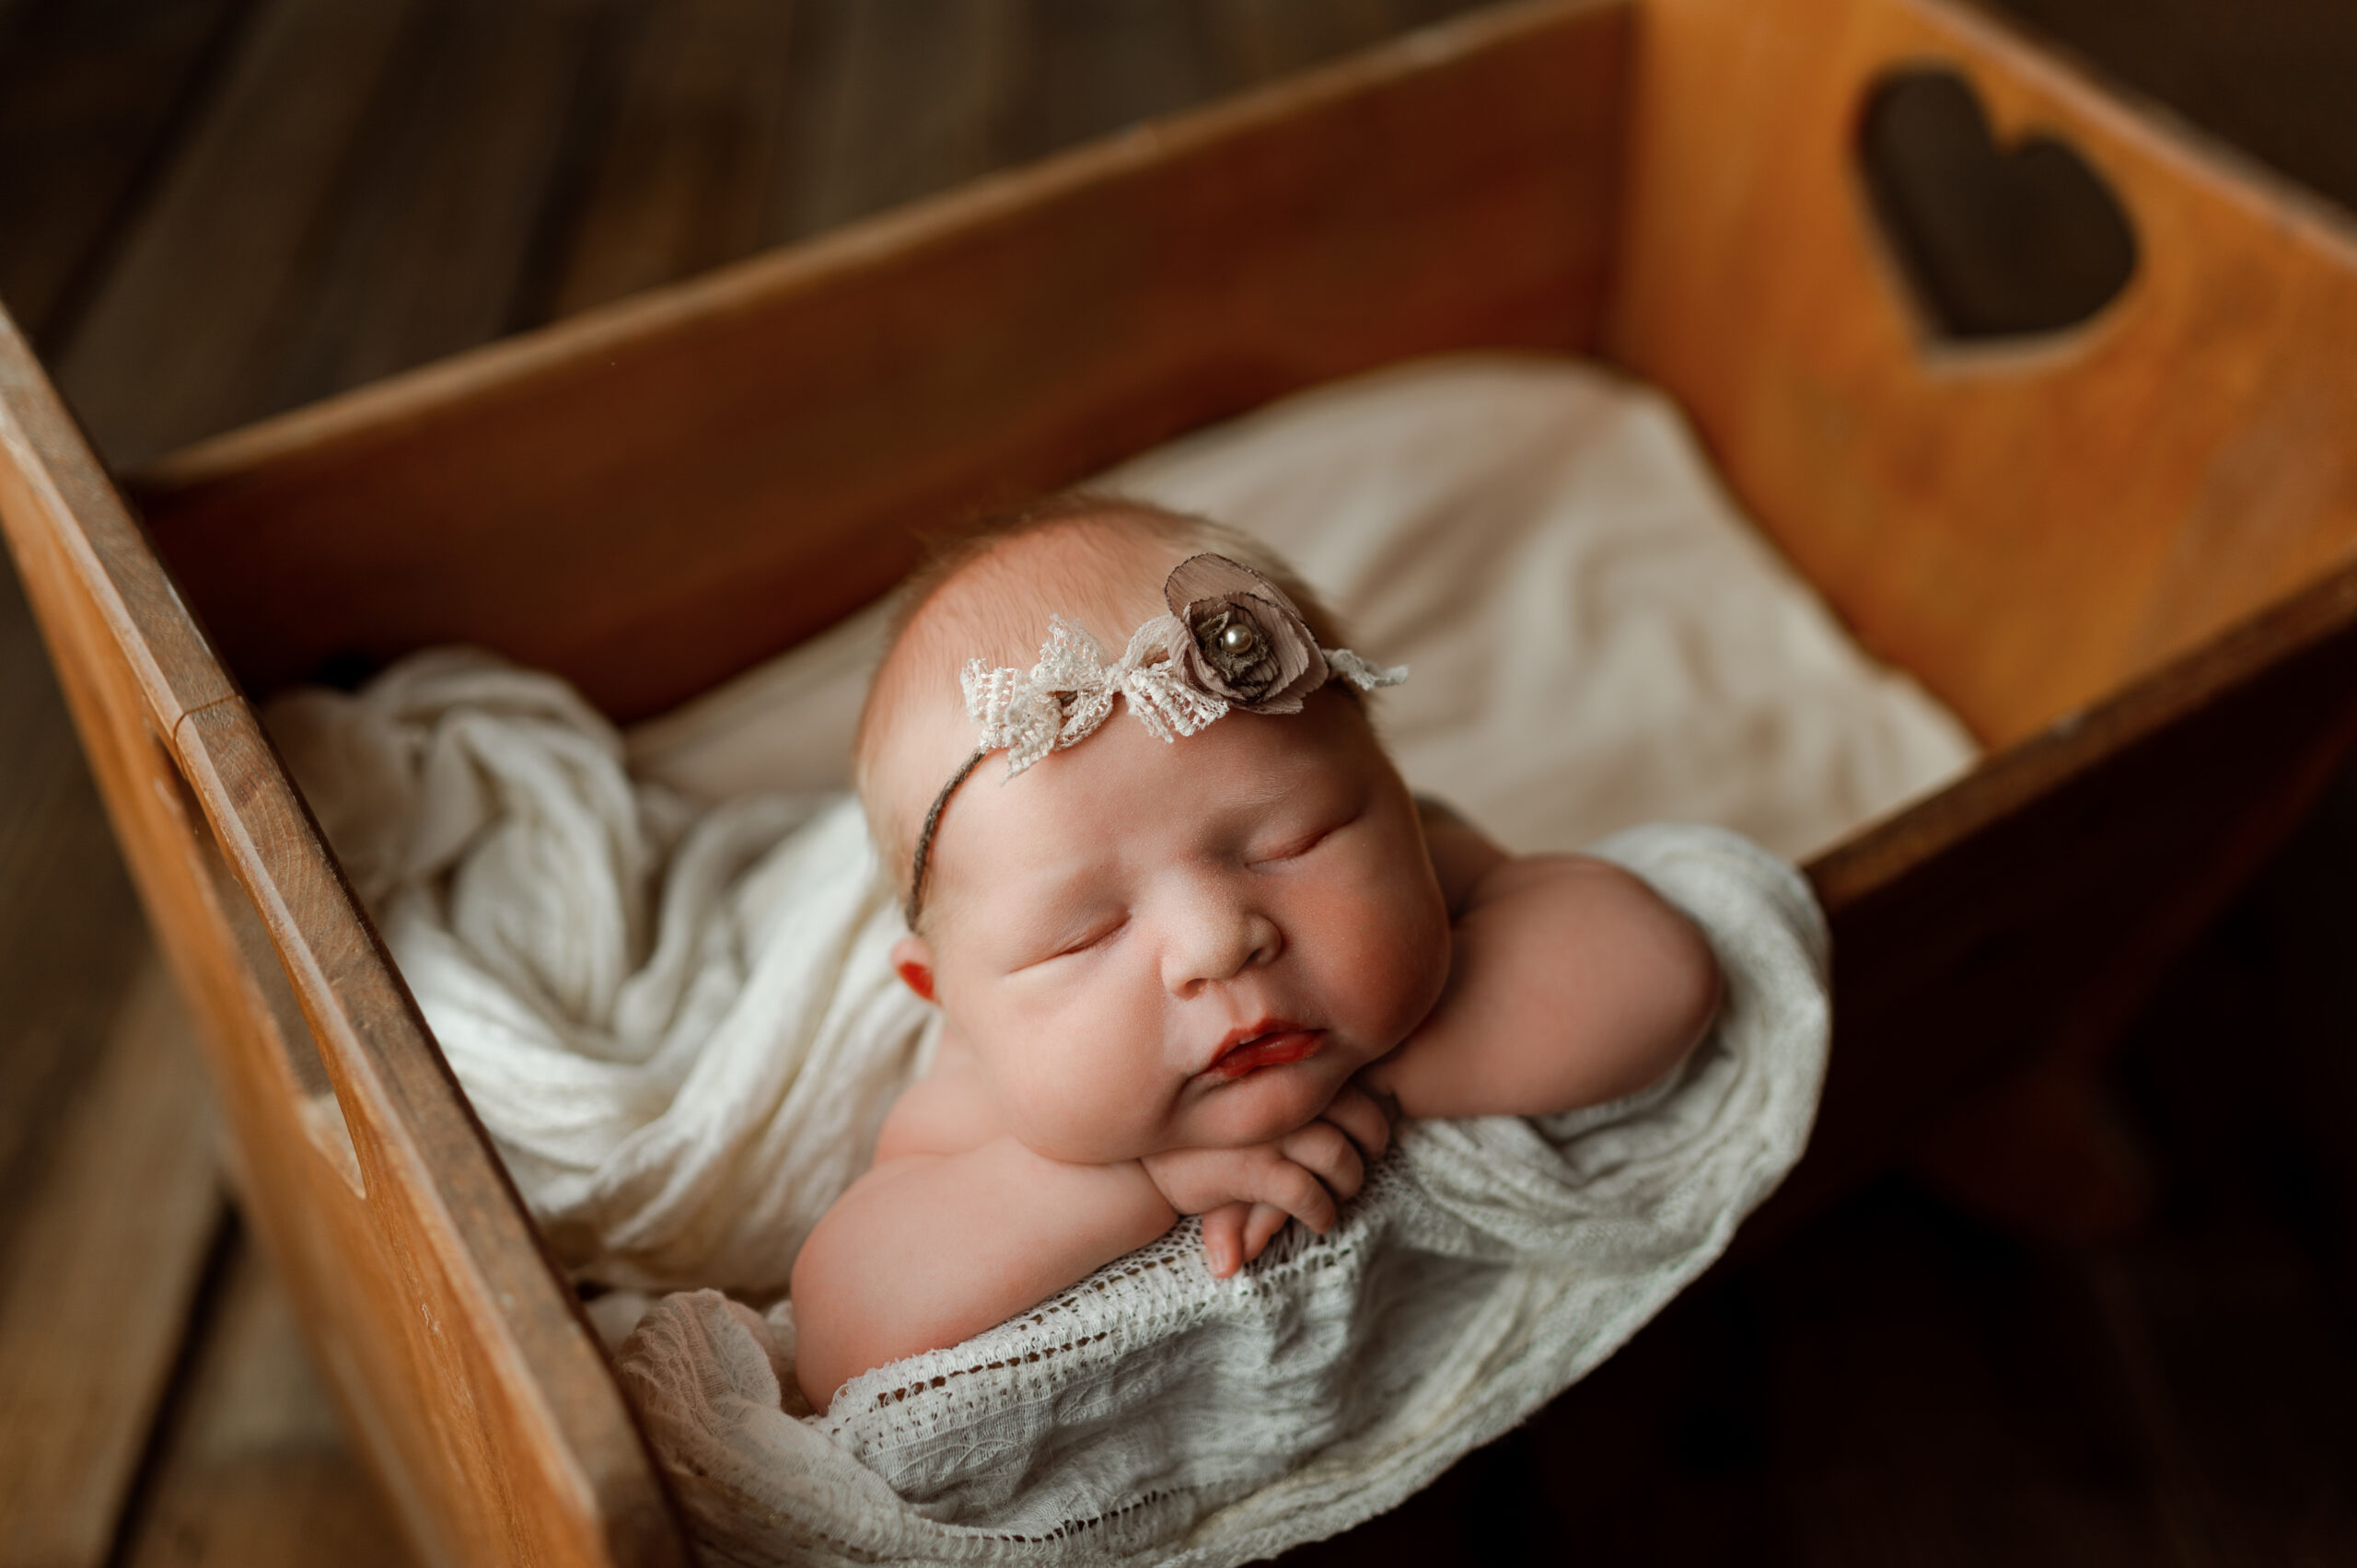 newborn baby girl posed in a wooden crib with a heart shape cutout